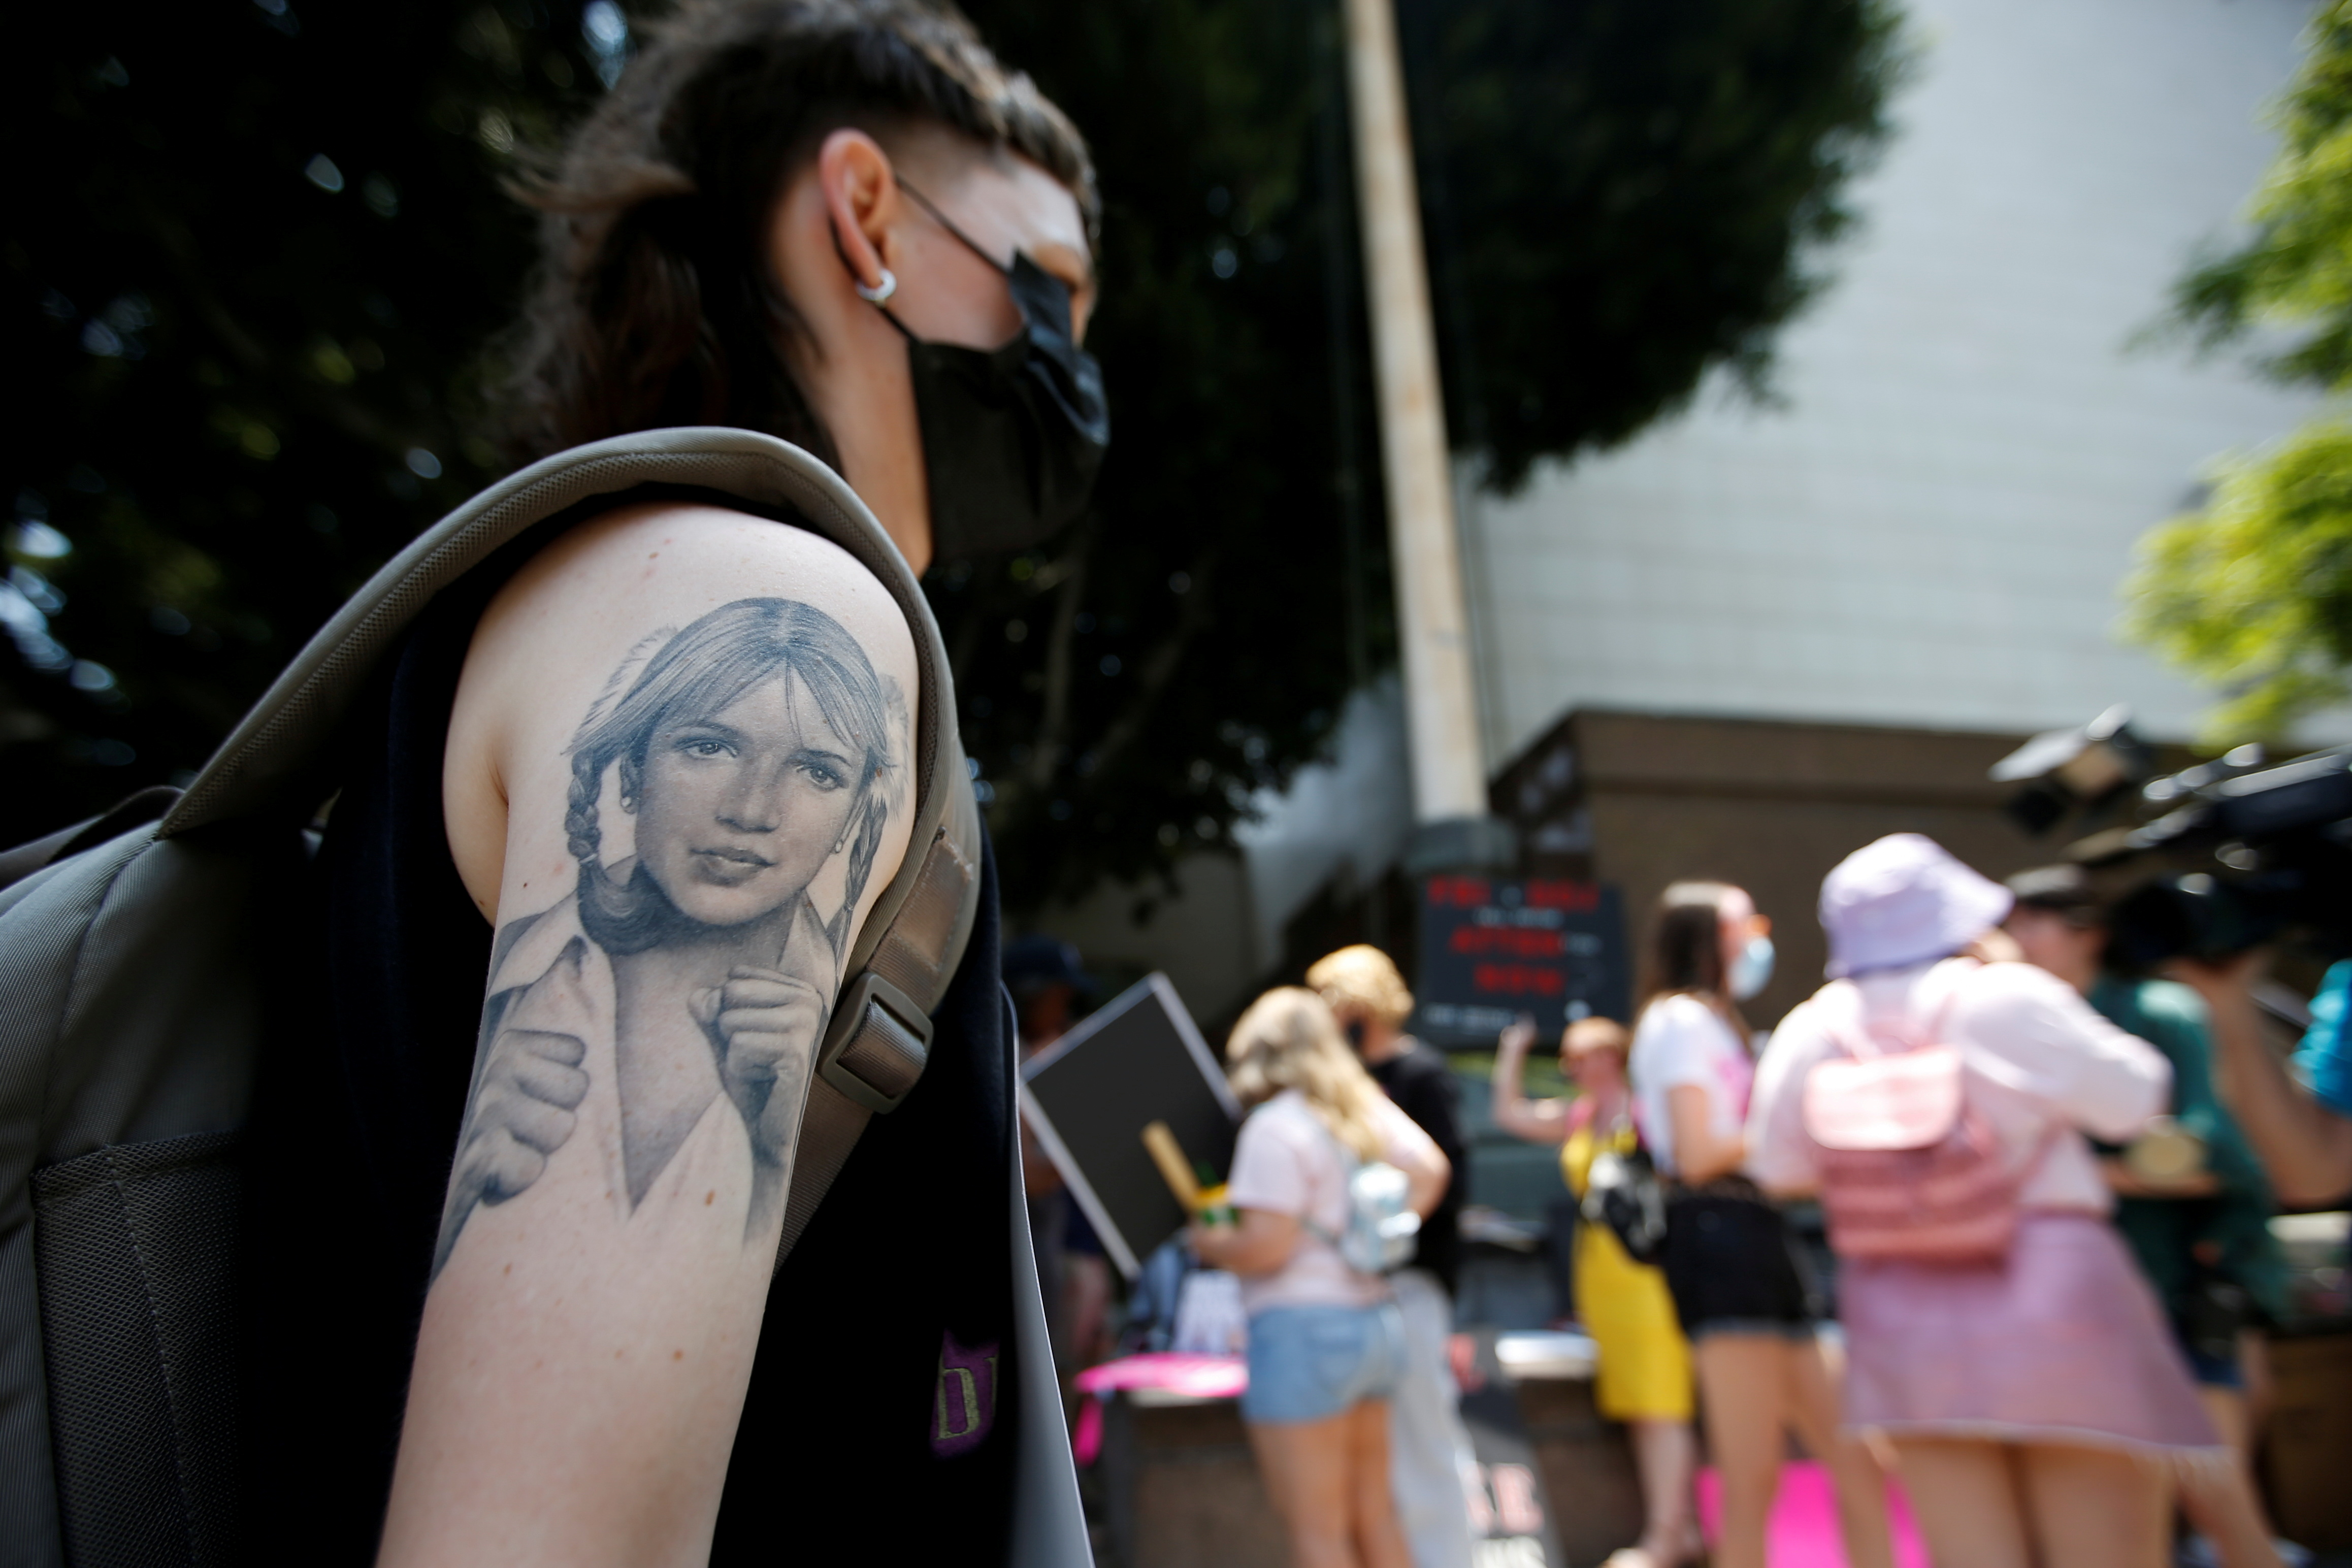 People protest in support of pop star Britney Spears on the day of a conservatorship case hearing in Los Angeles